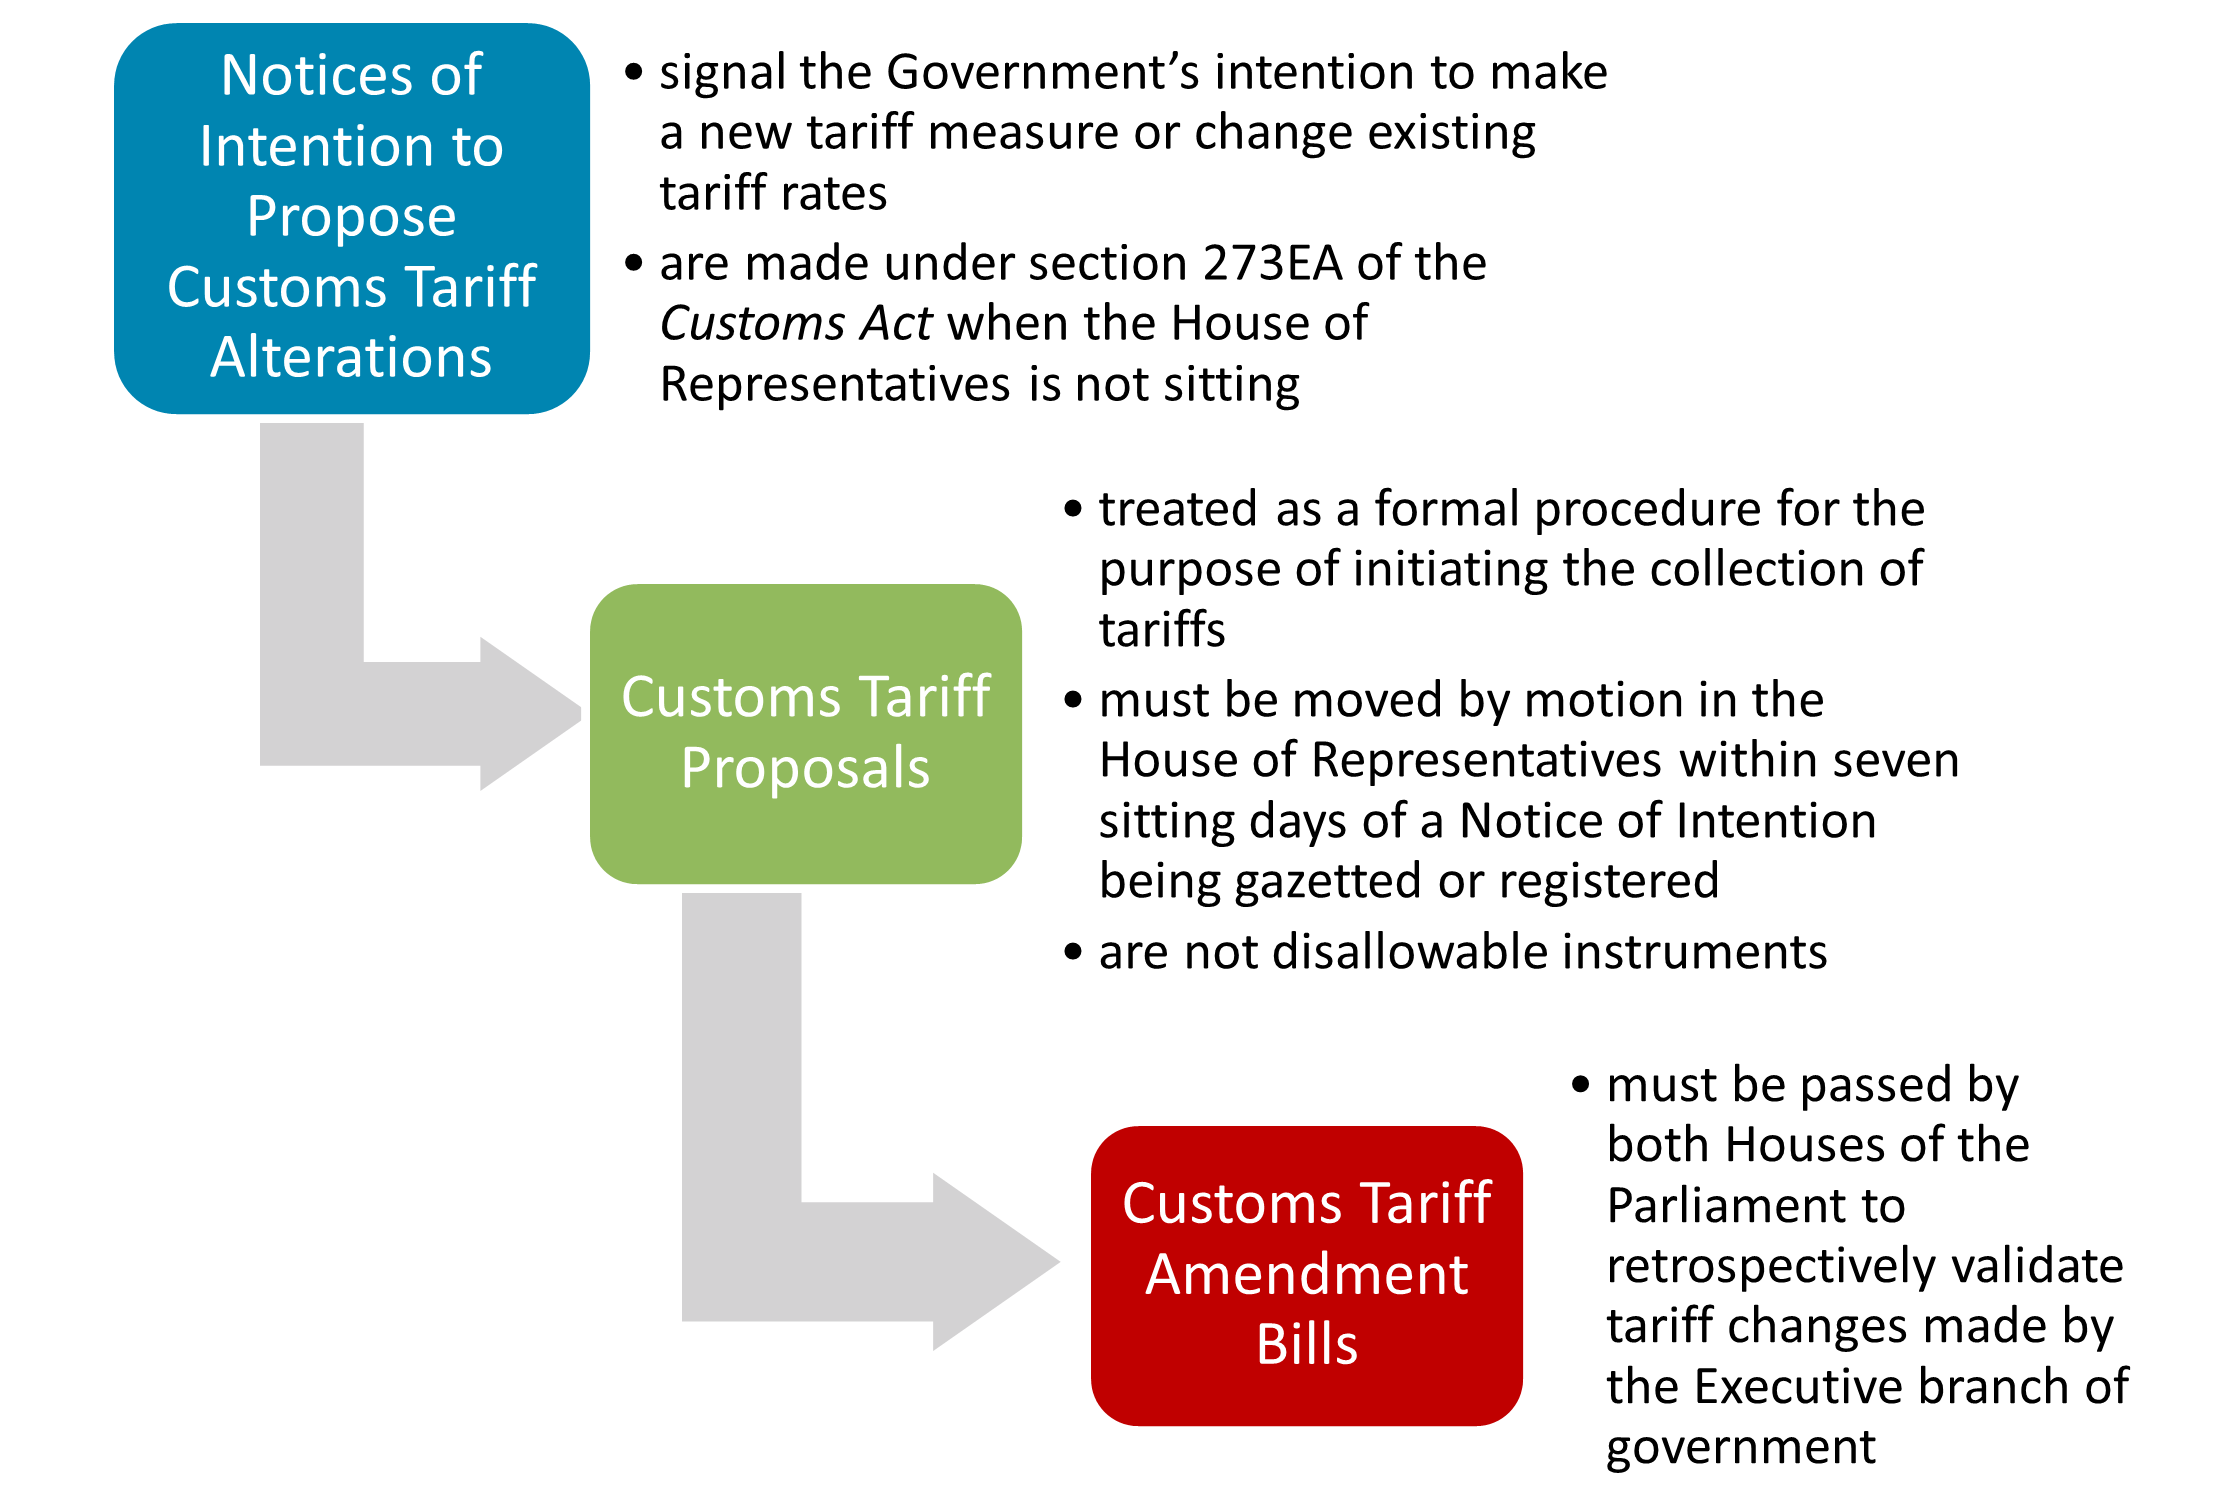 Overview of the Customs Tariff Proposal process